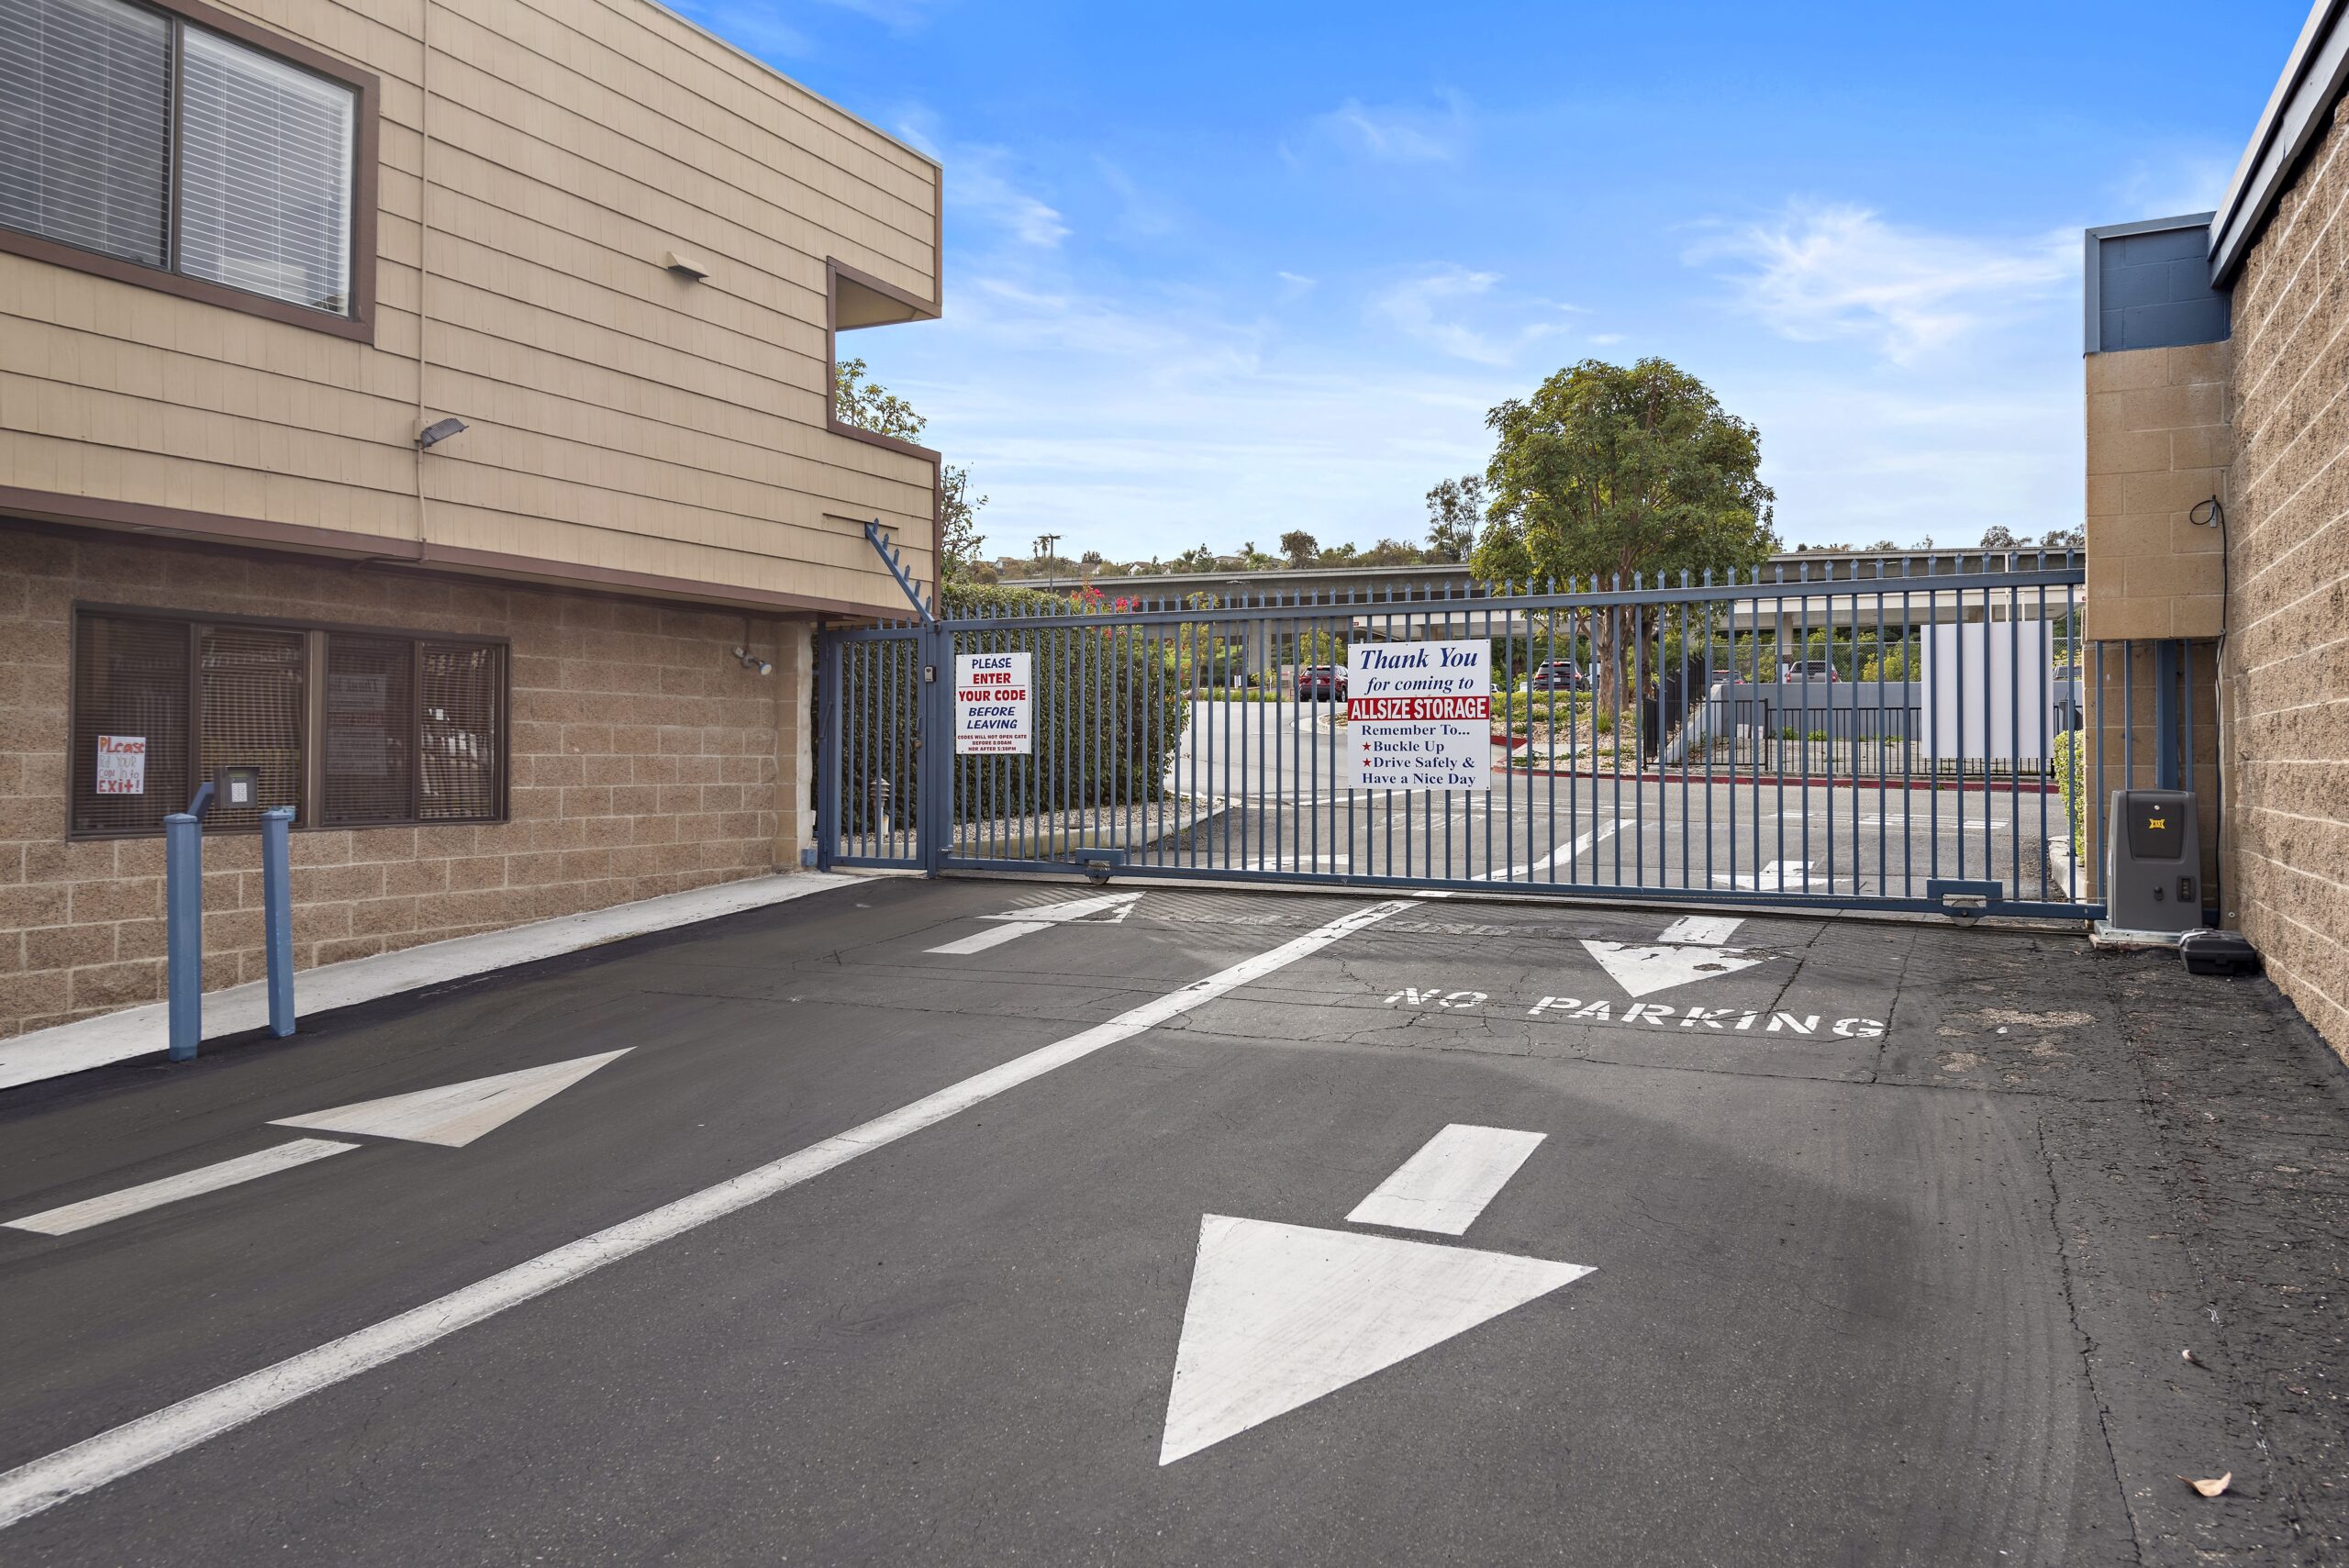 The secure, 2-way, gated entrance to the Allsize Self Storage facility.